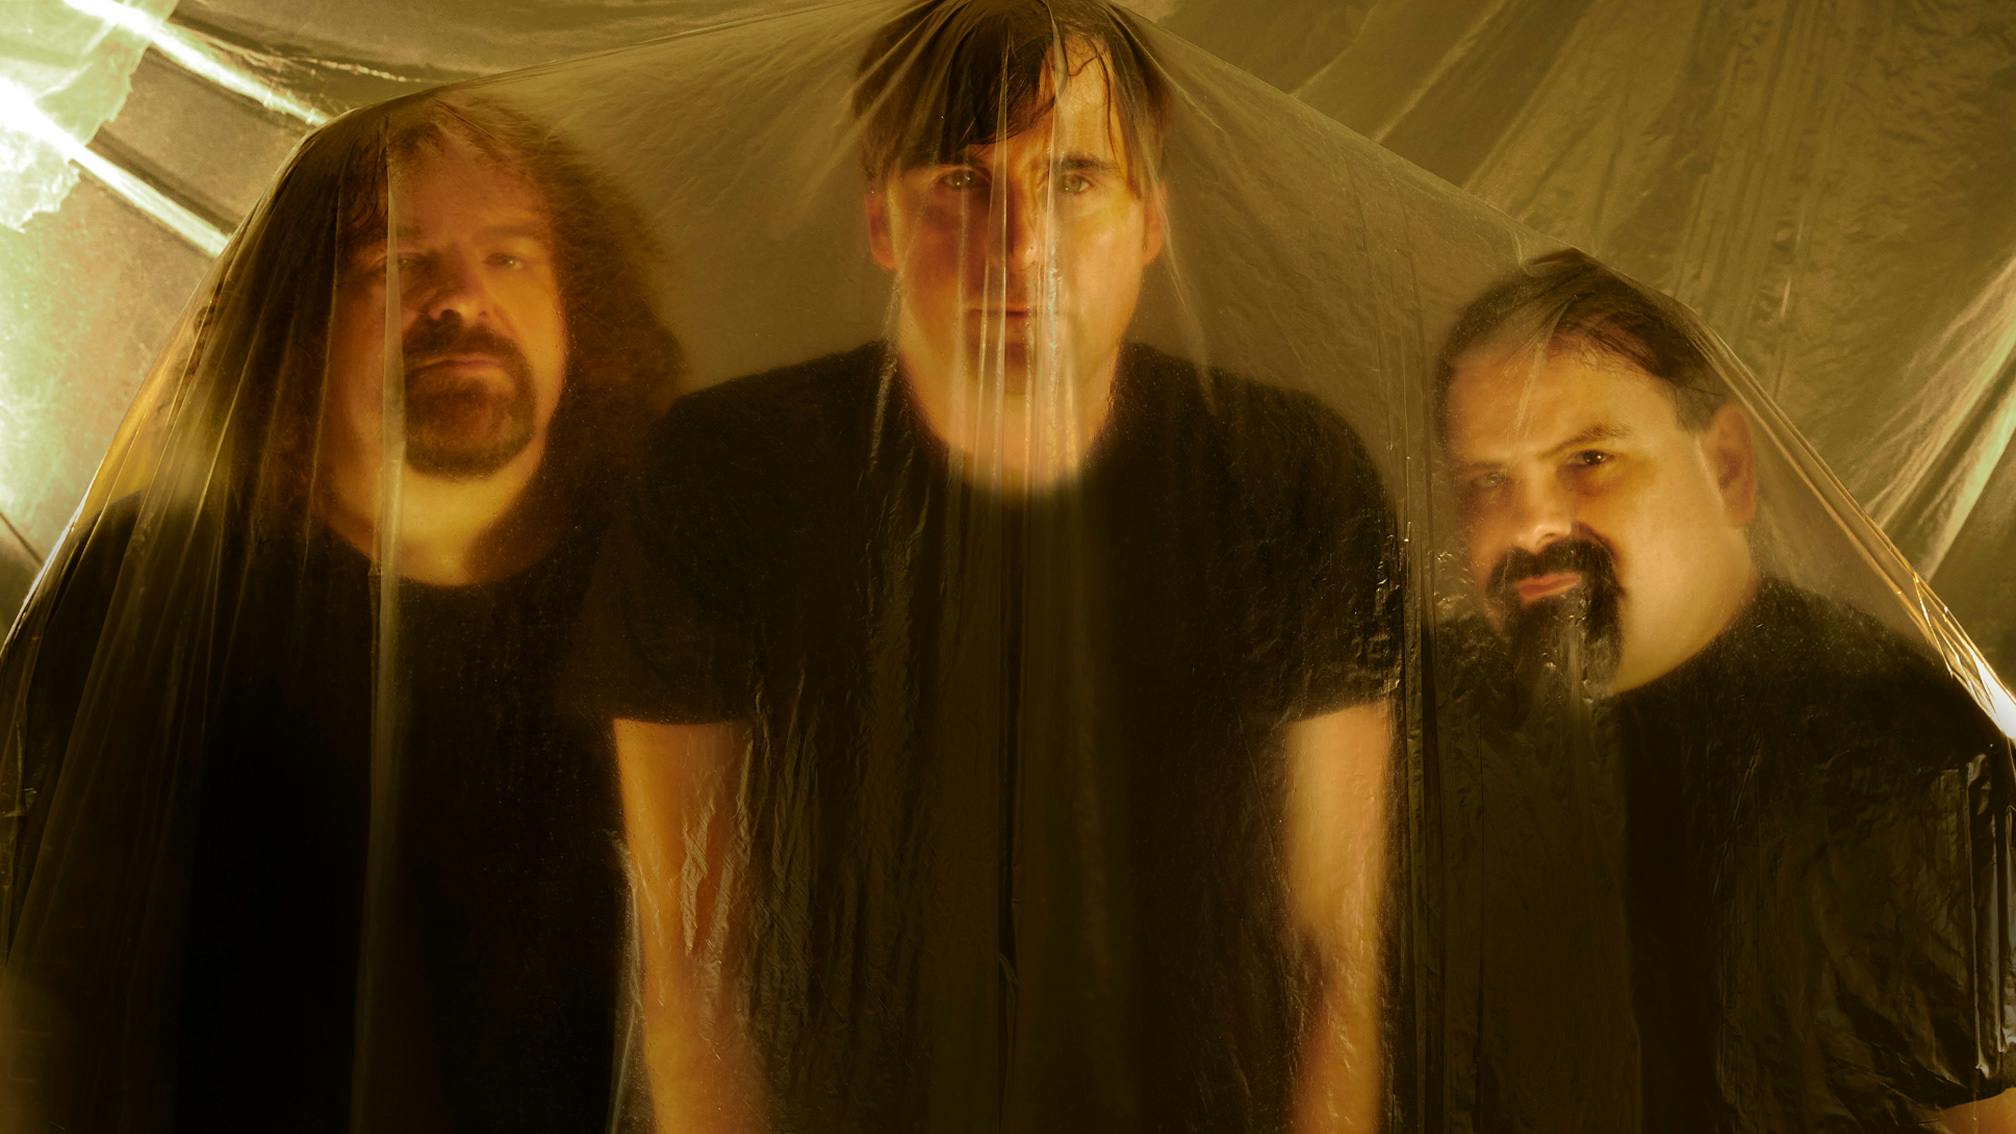 Napalm Death Announce New Album, Throes Of Joy In The Jaws Of Defeatism